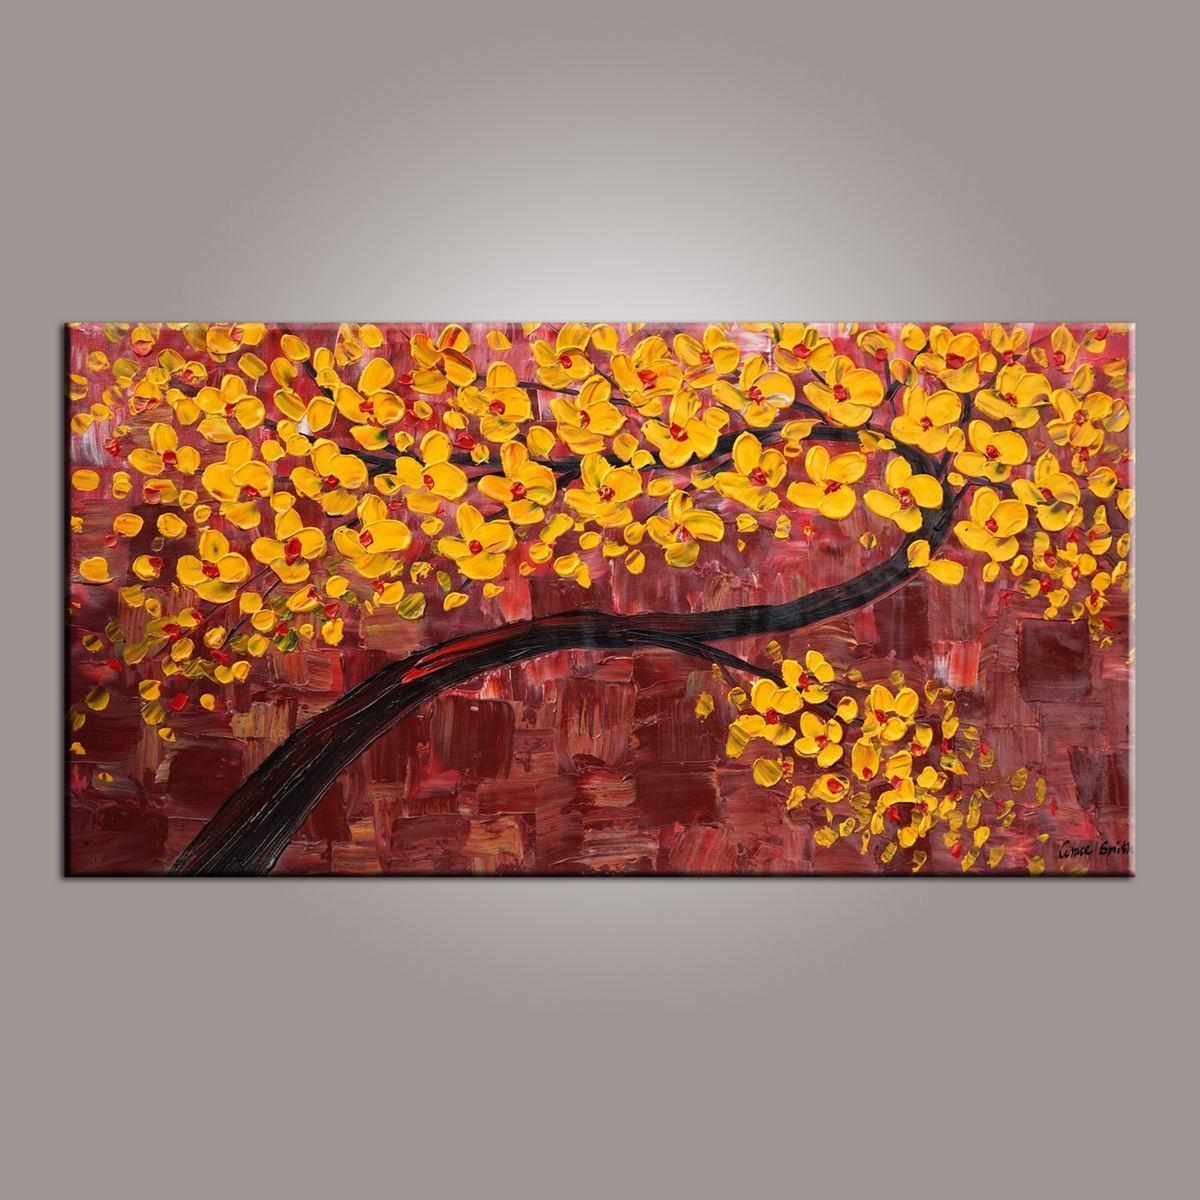 Painting on Sale, Canvas Art, Flower Tree Painting, Abstract Art Painting, Dining Room Wall Art, Art on Canvas, Modern Art, Contemporary Art-Art Painting Canvas